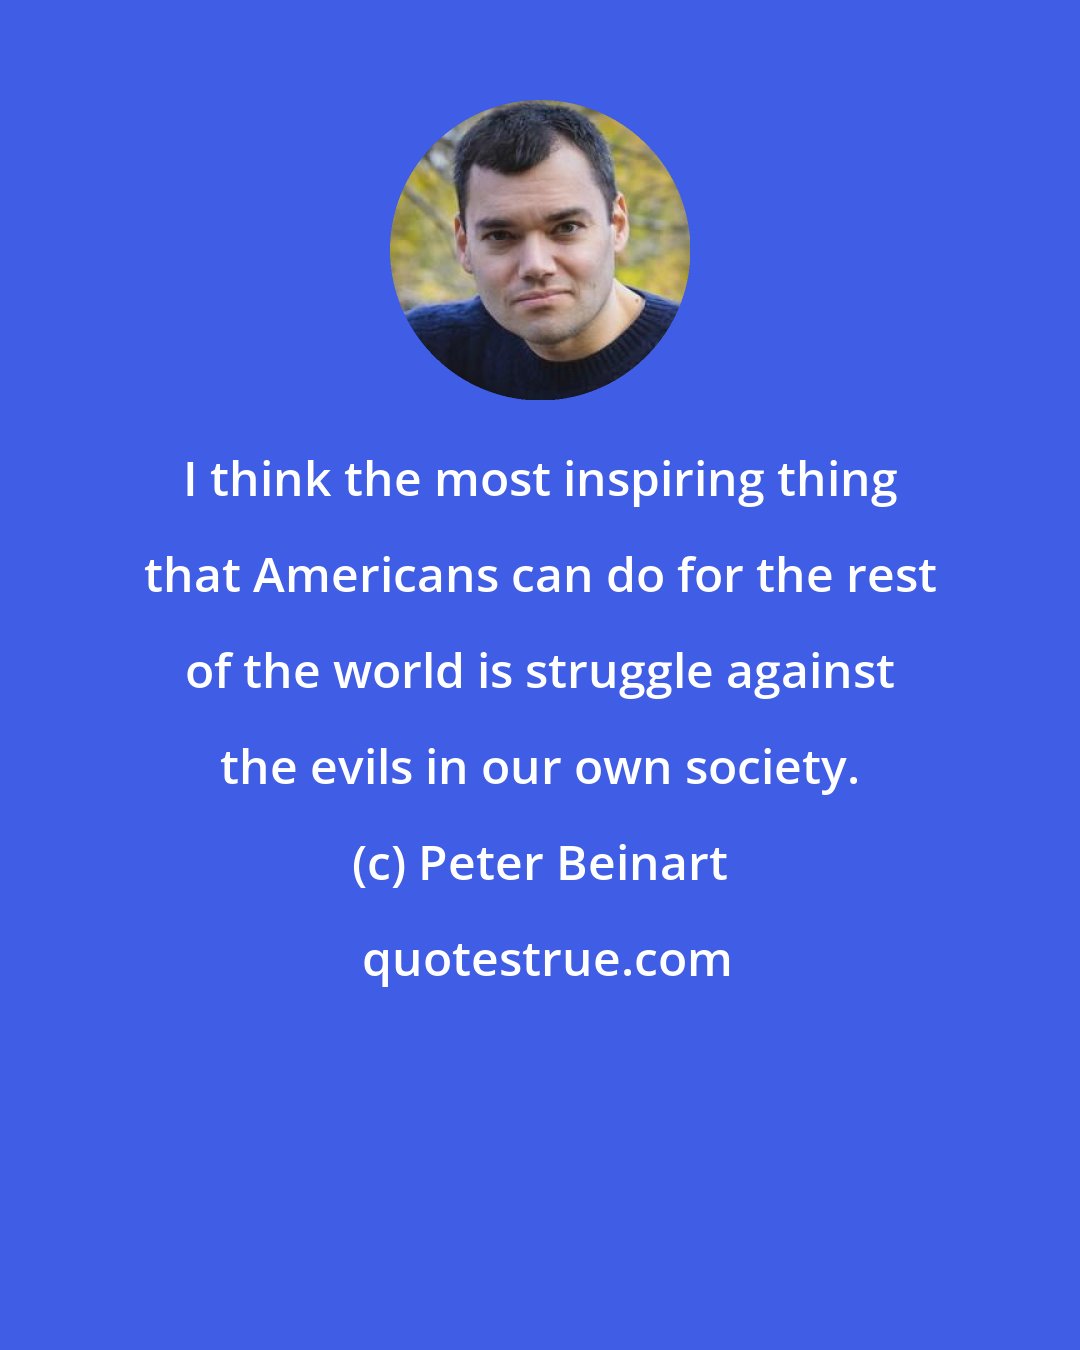 Peter Beinart: I think the most inspiring thing that Americans can do for the rest of the world is struggle against the evils in our own society.